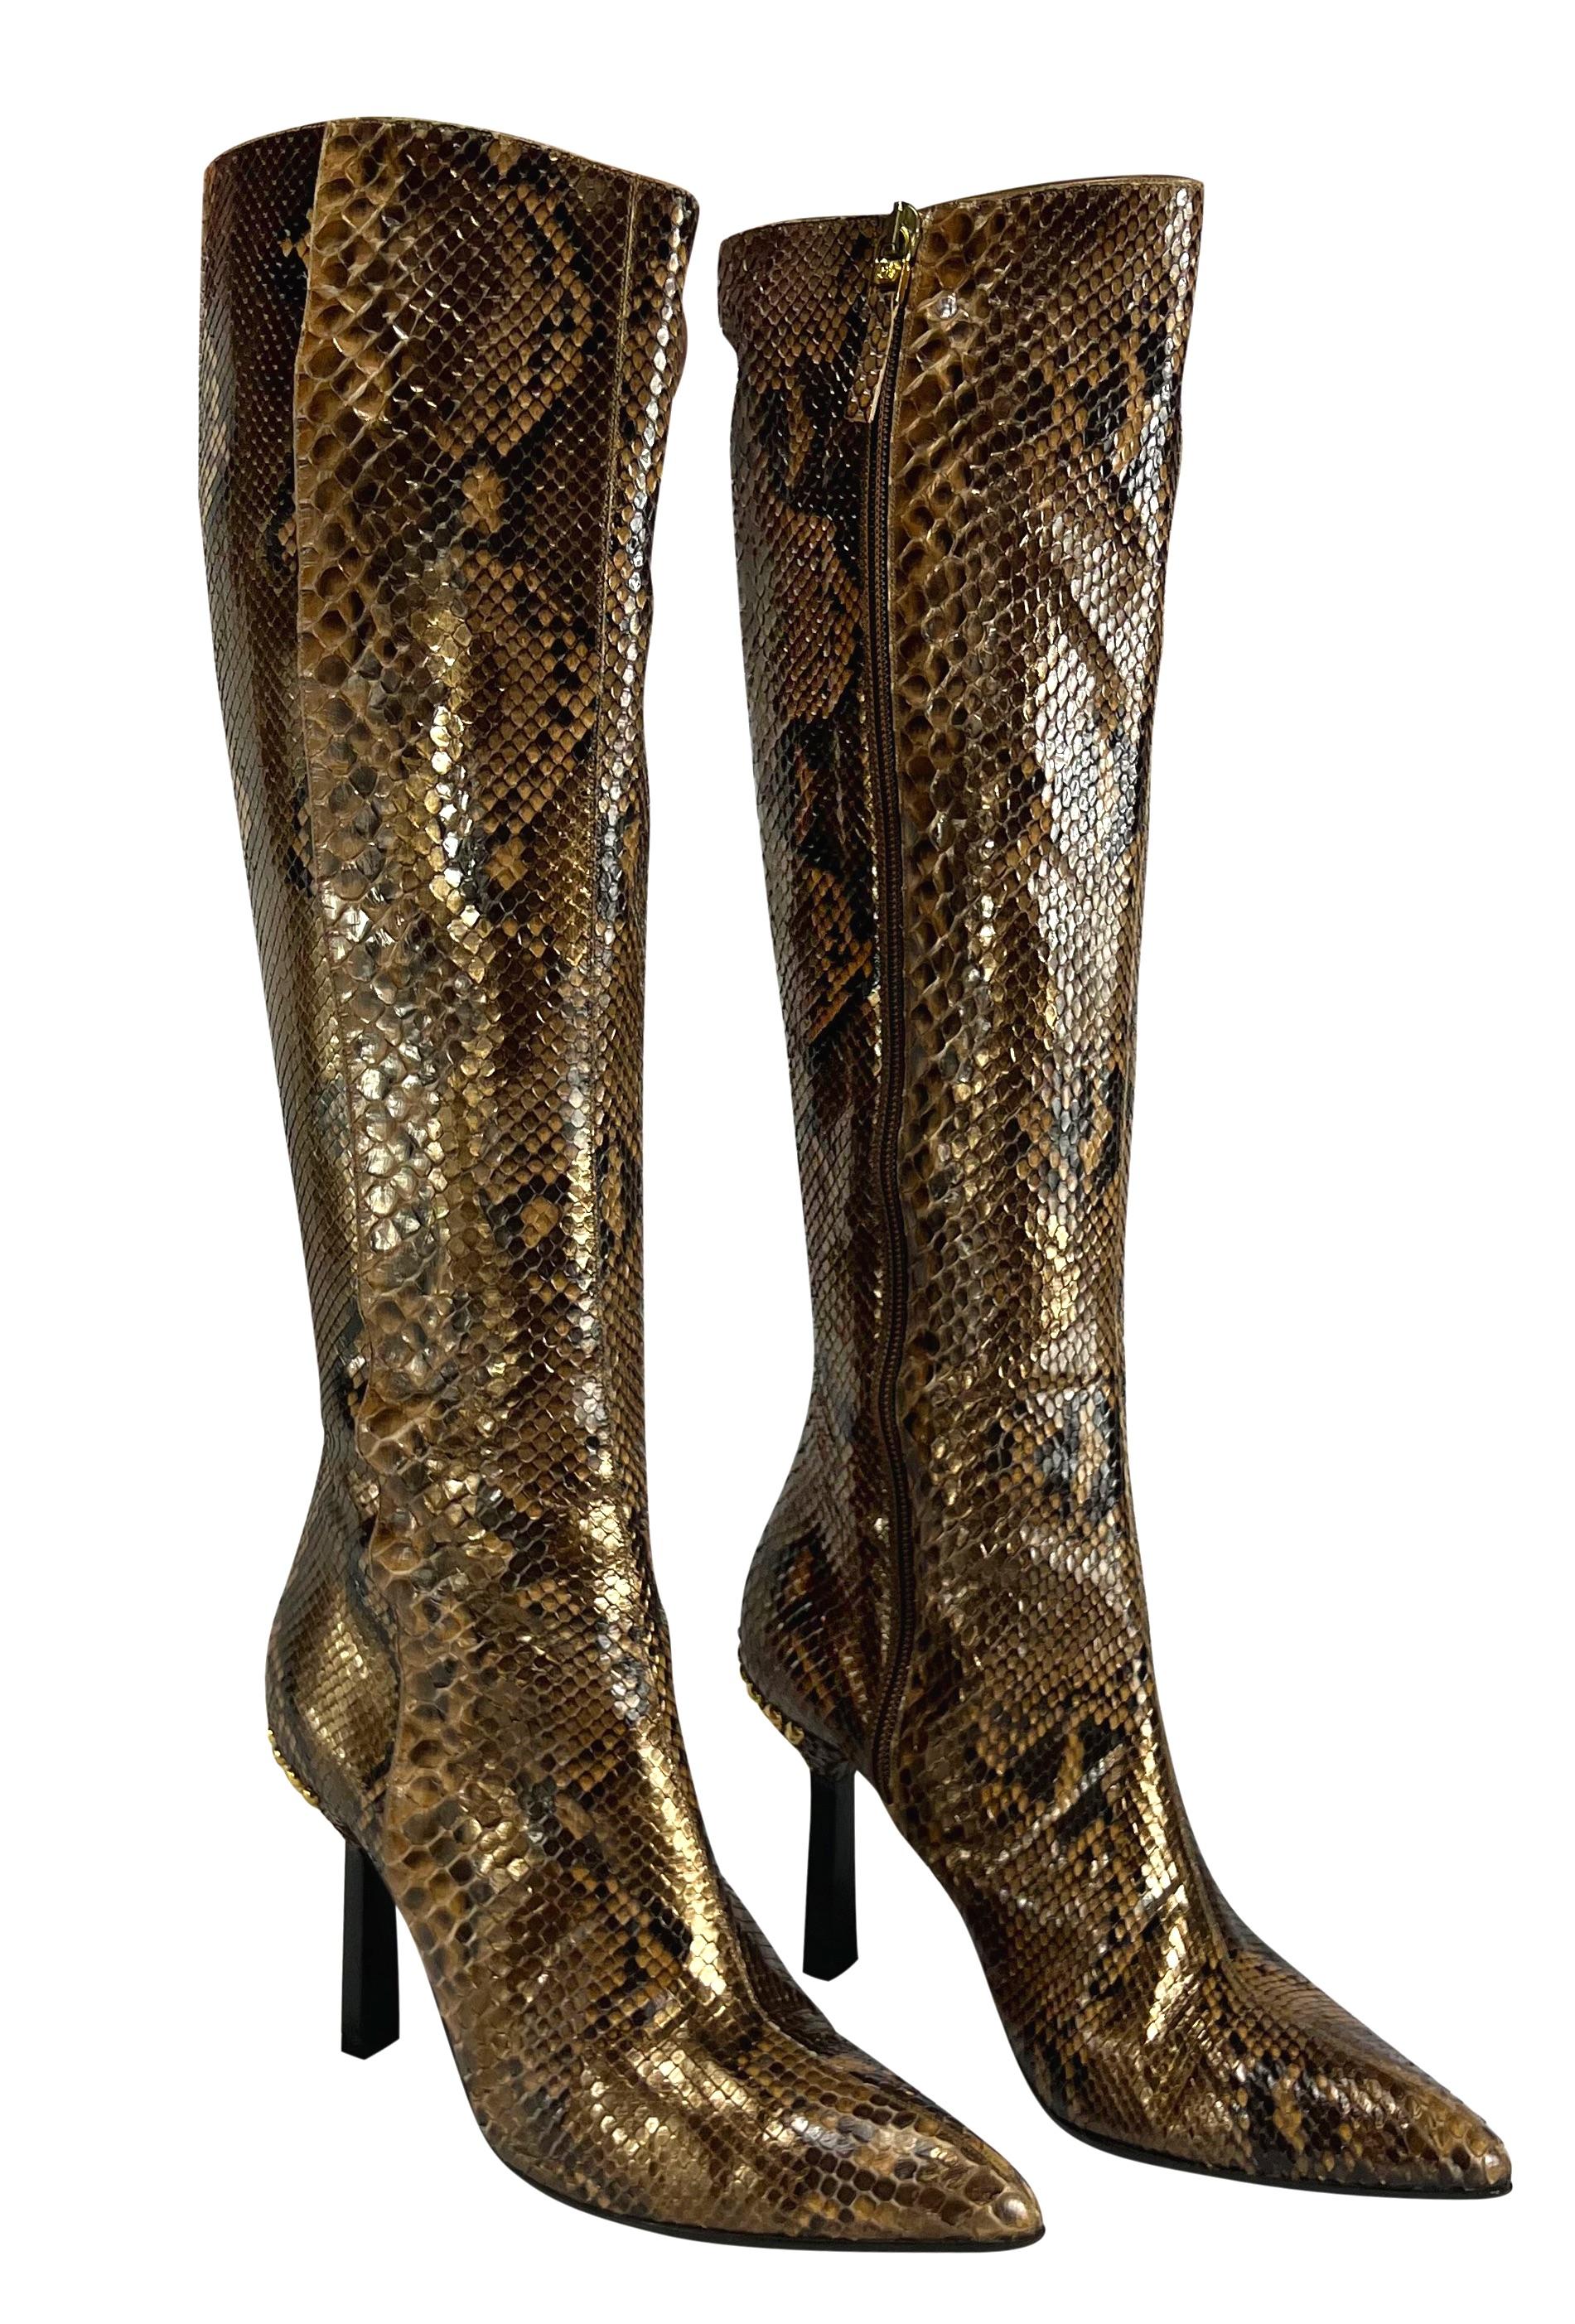 F/W 1999 Gianni Versace by Donatella Metallic Python Heel Boots Size 37 For Sale 4